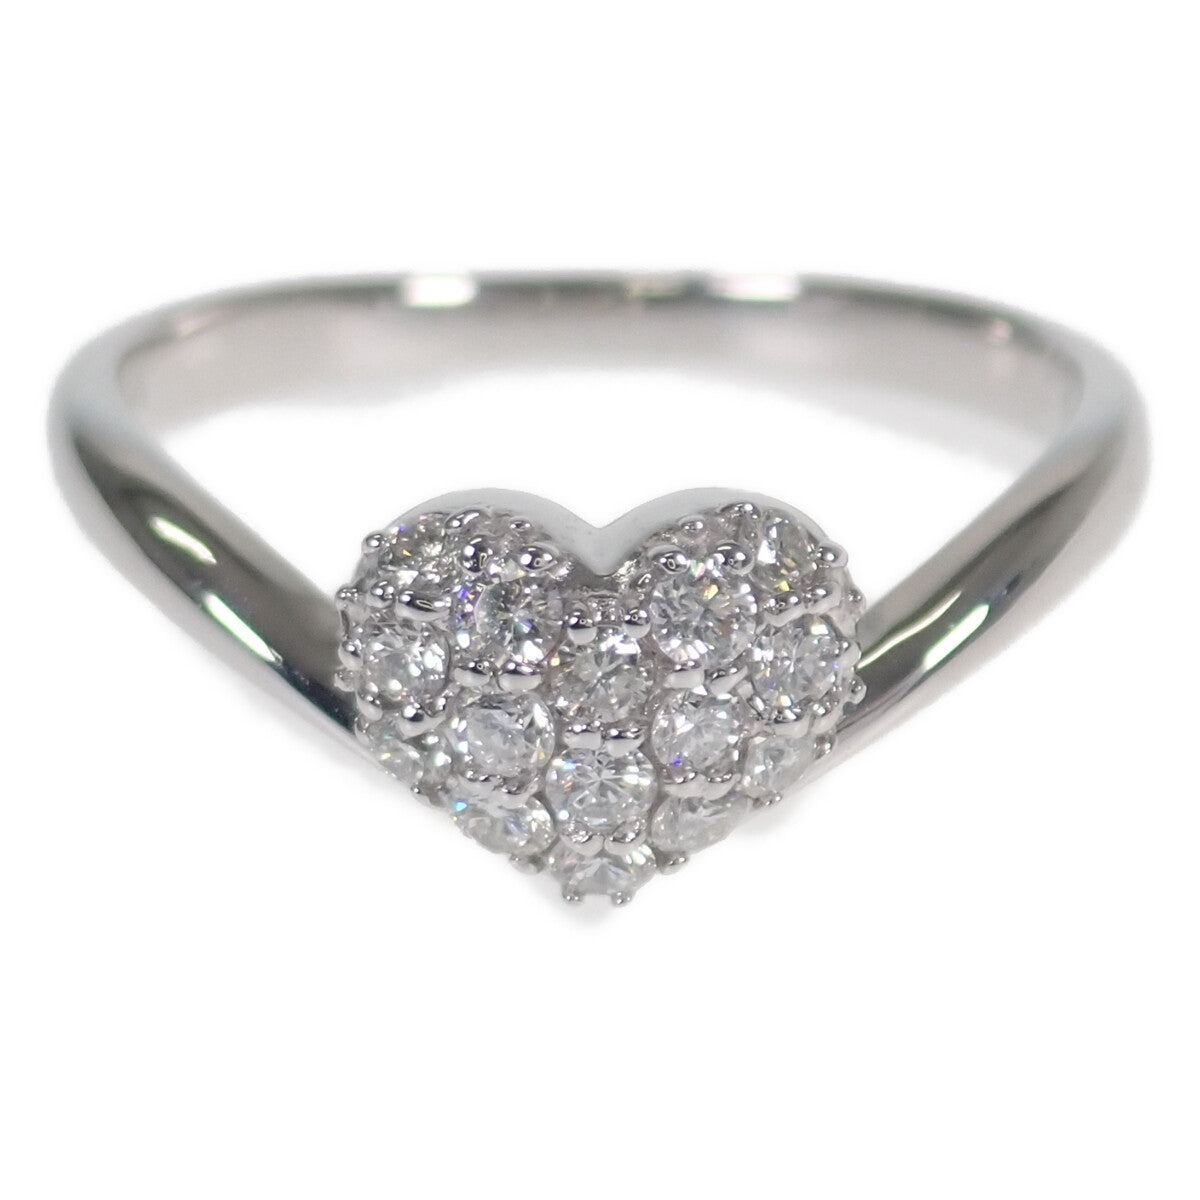 [LuxUness]  Ladies' K18 White Gold Heart Pave Design Diamond Ring (0.28ct) - Size 11, Preowned in Excellent condition